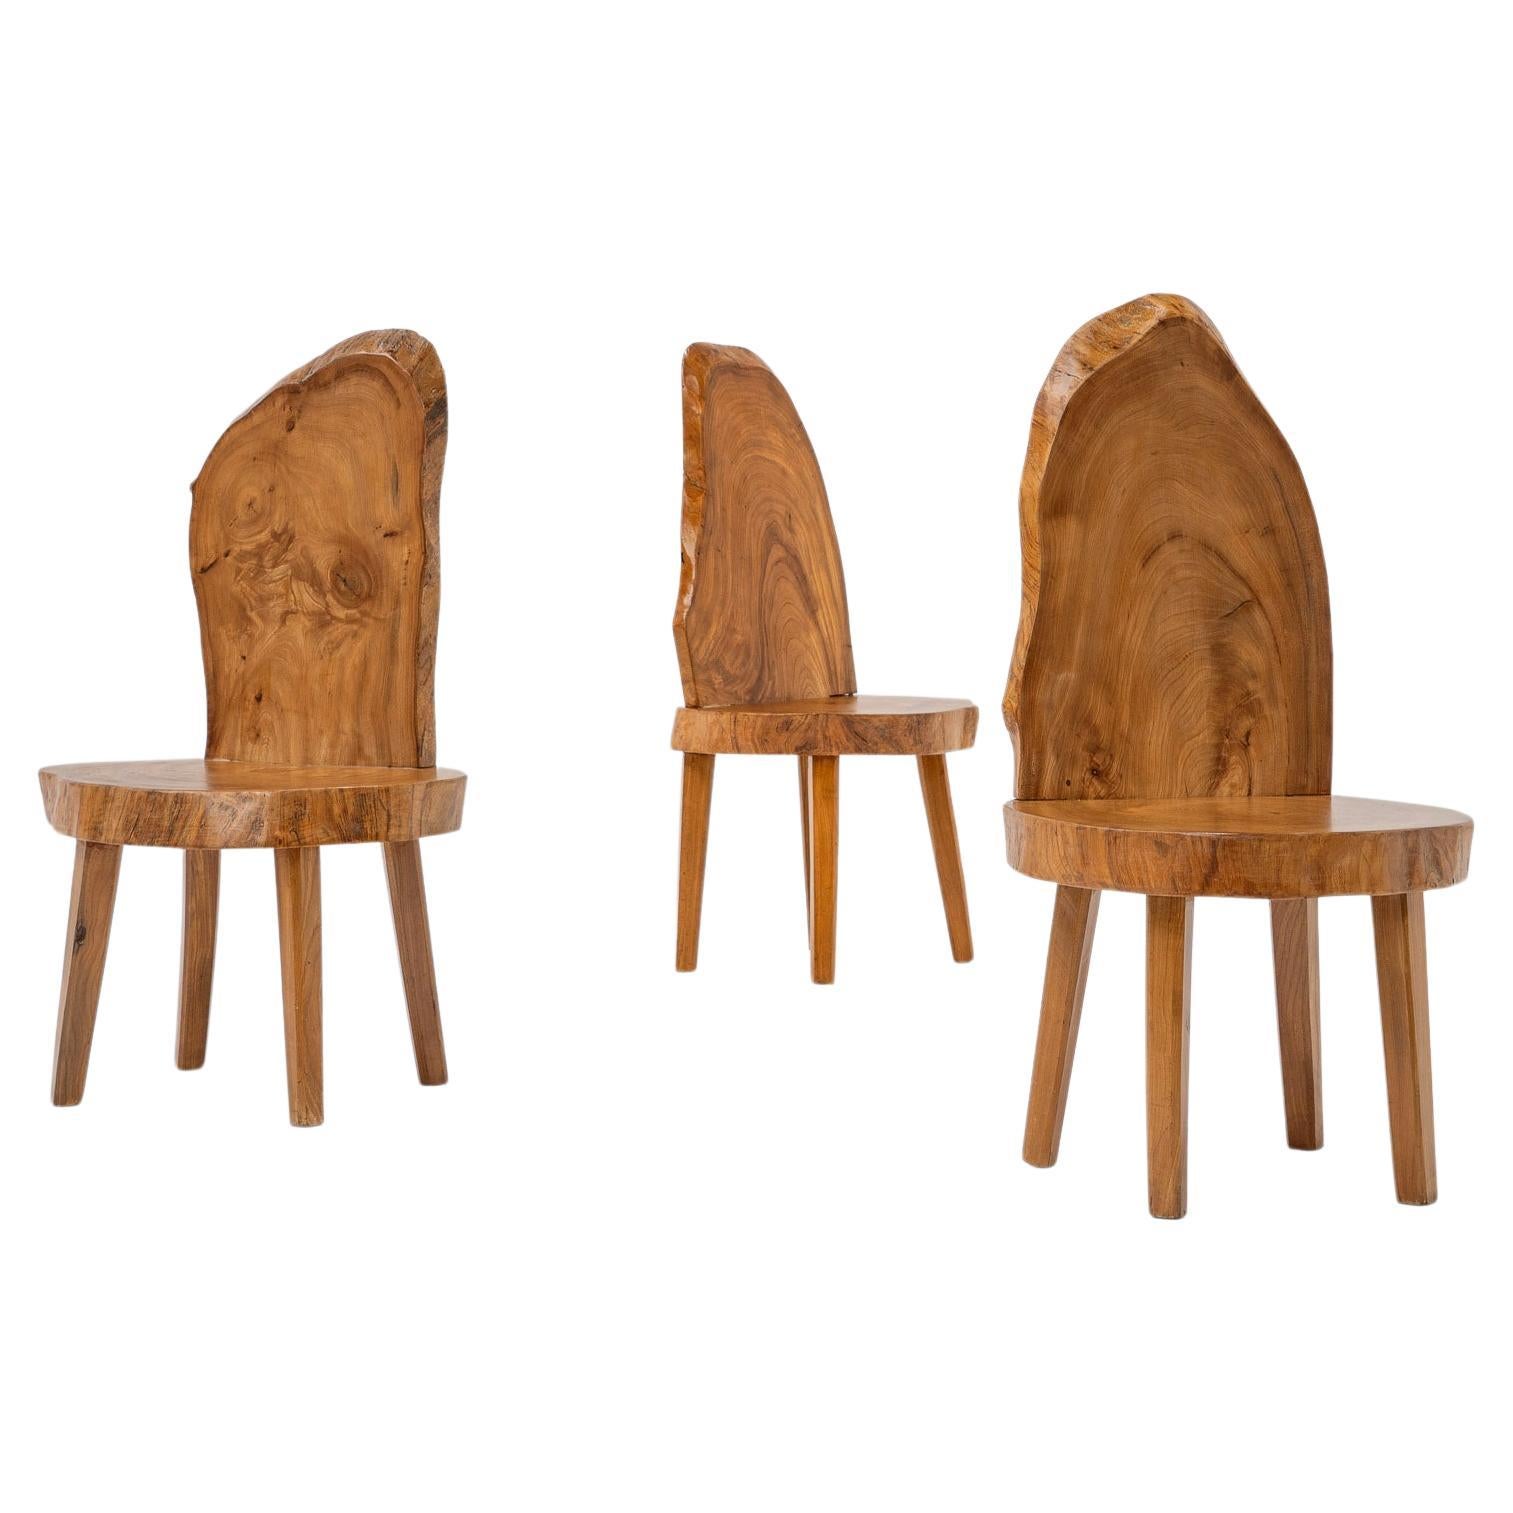 Carved Wooden Tree Trunk Chairs, France, 1980s For Sale